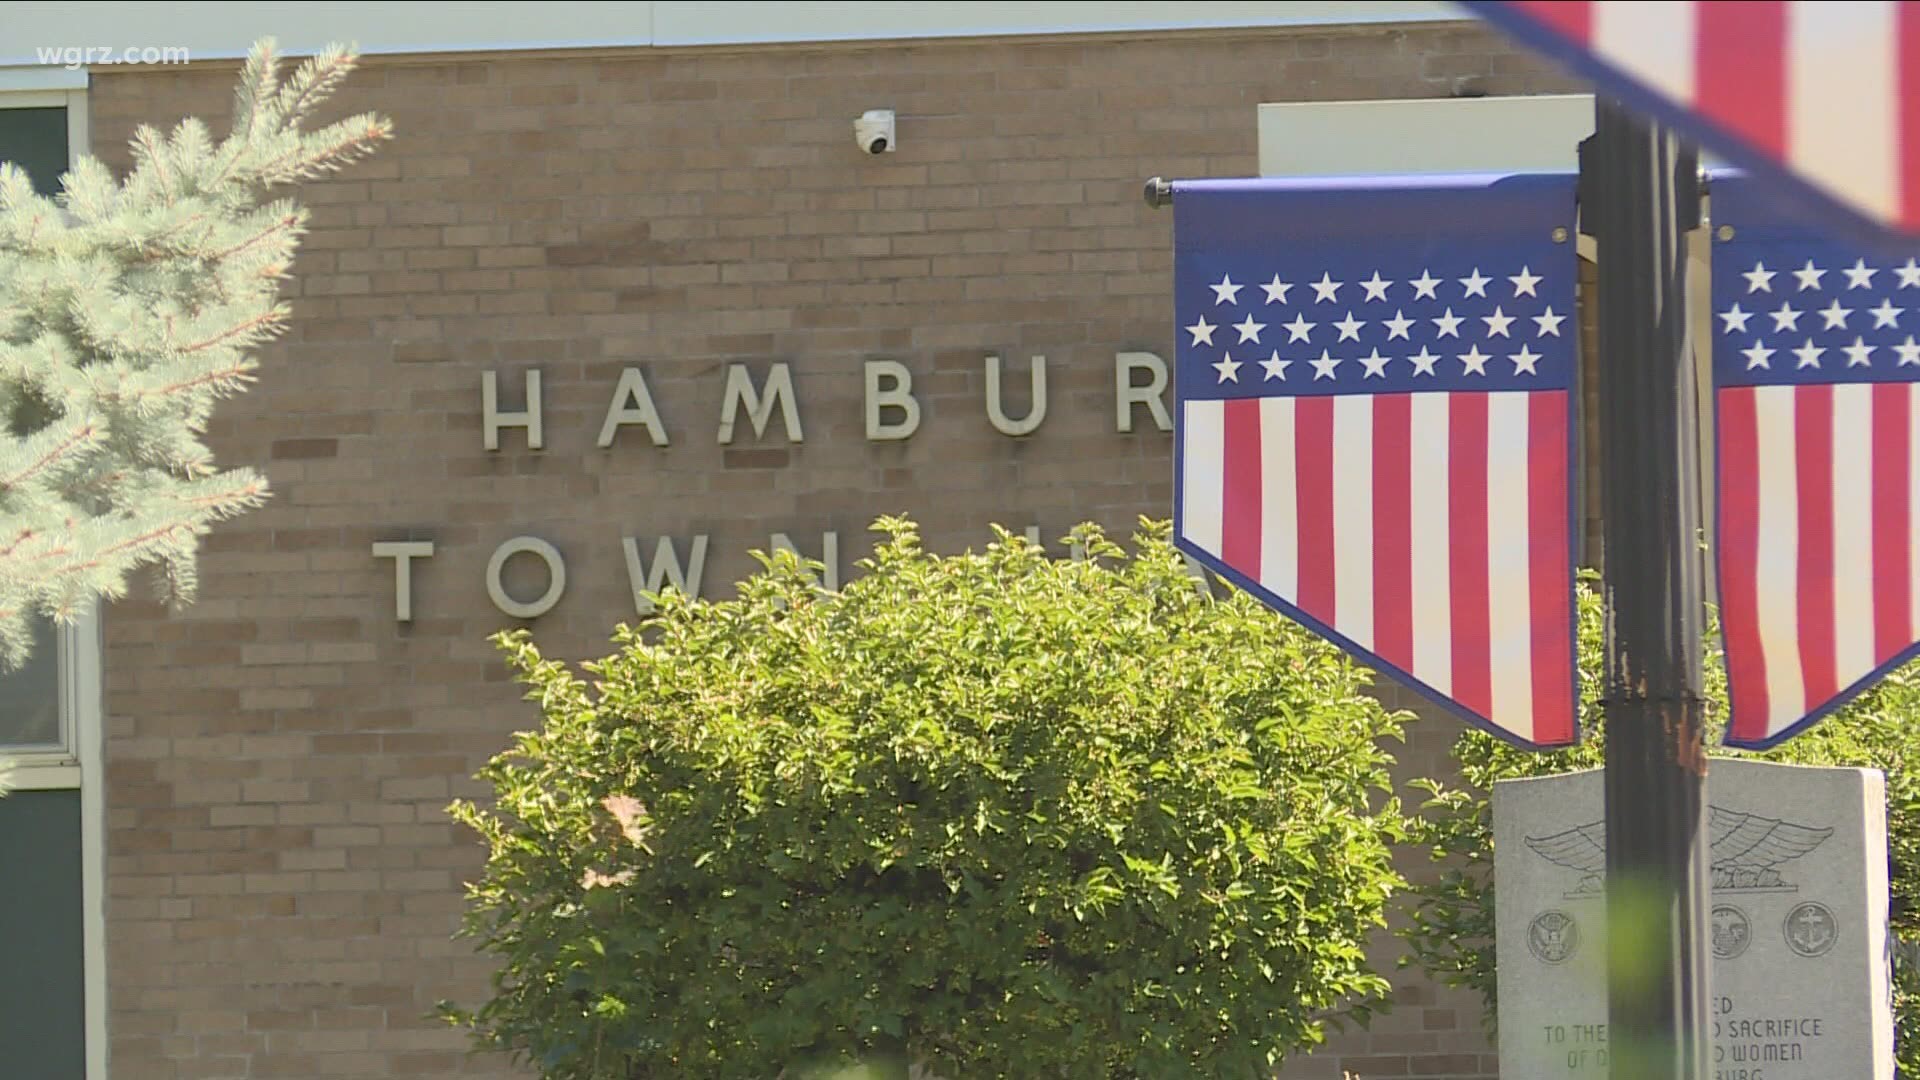 We have been reporting about a troubling number of new cases in the Town of Hamburg. 
It's actually leading all of Erie county in case count.